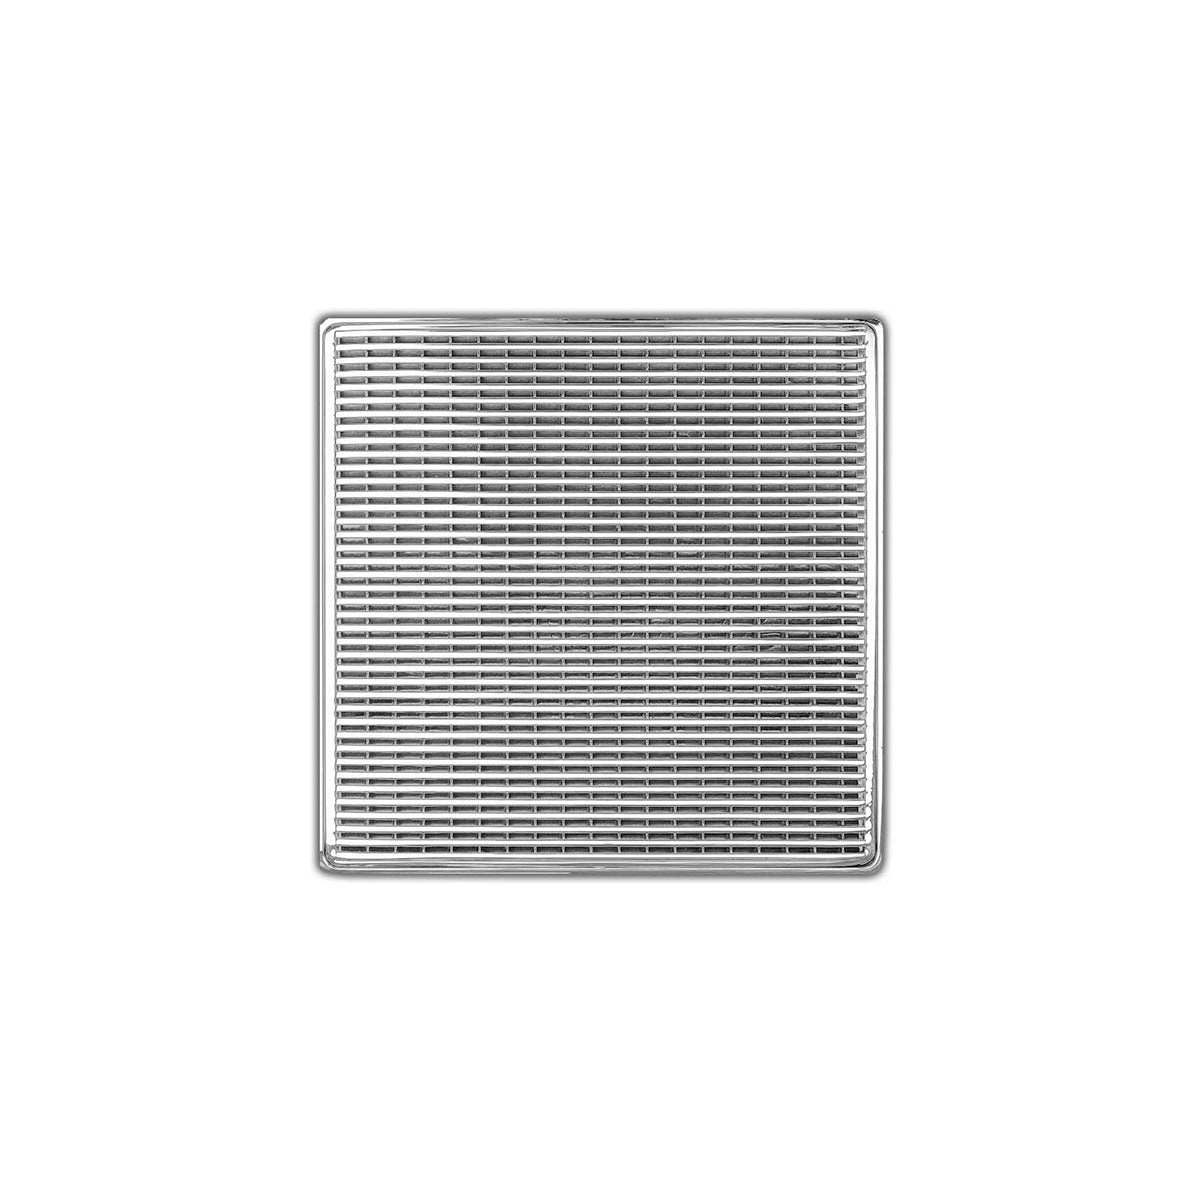 Infinity Drain 5" x 5" WD 5 Premium Center Drain Kit with Wedge Wire Pattern Decorative Plate with ABS Drain Body, 2" Outlet